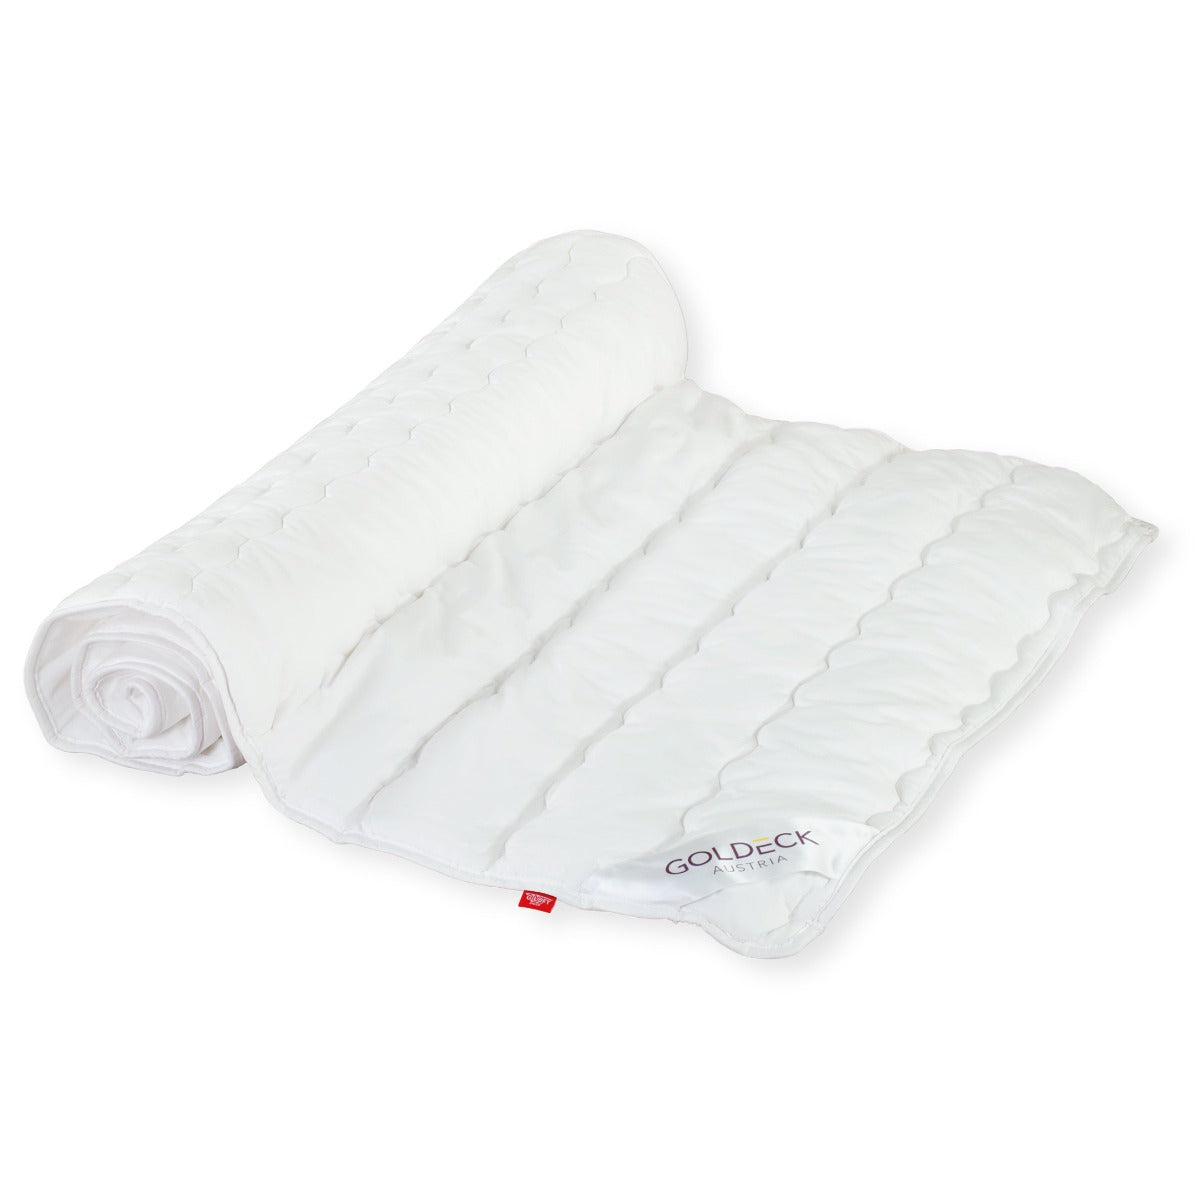 SOFT underbed with tension apron